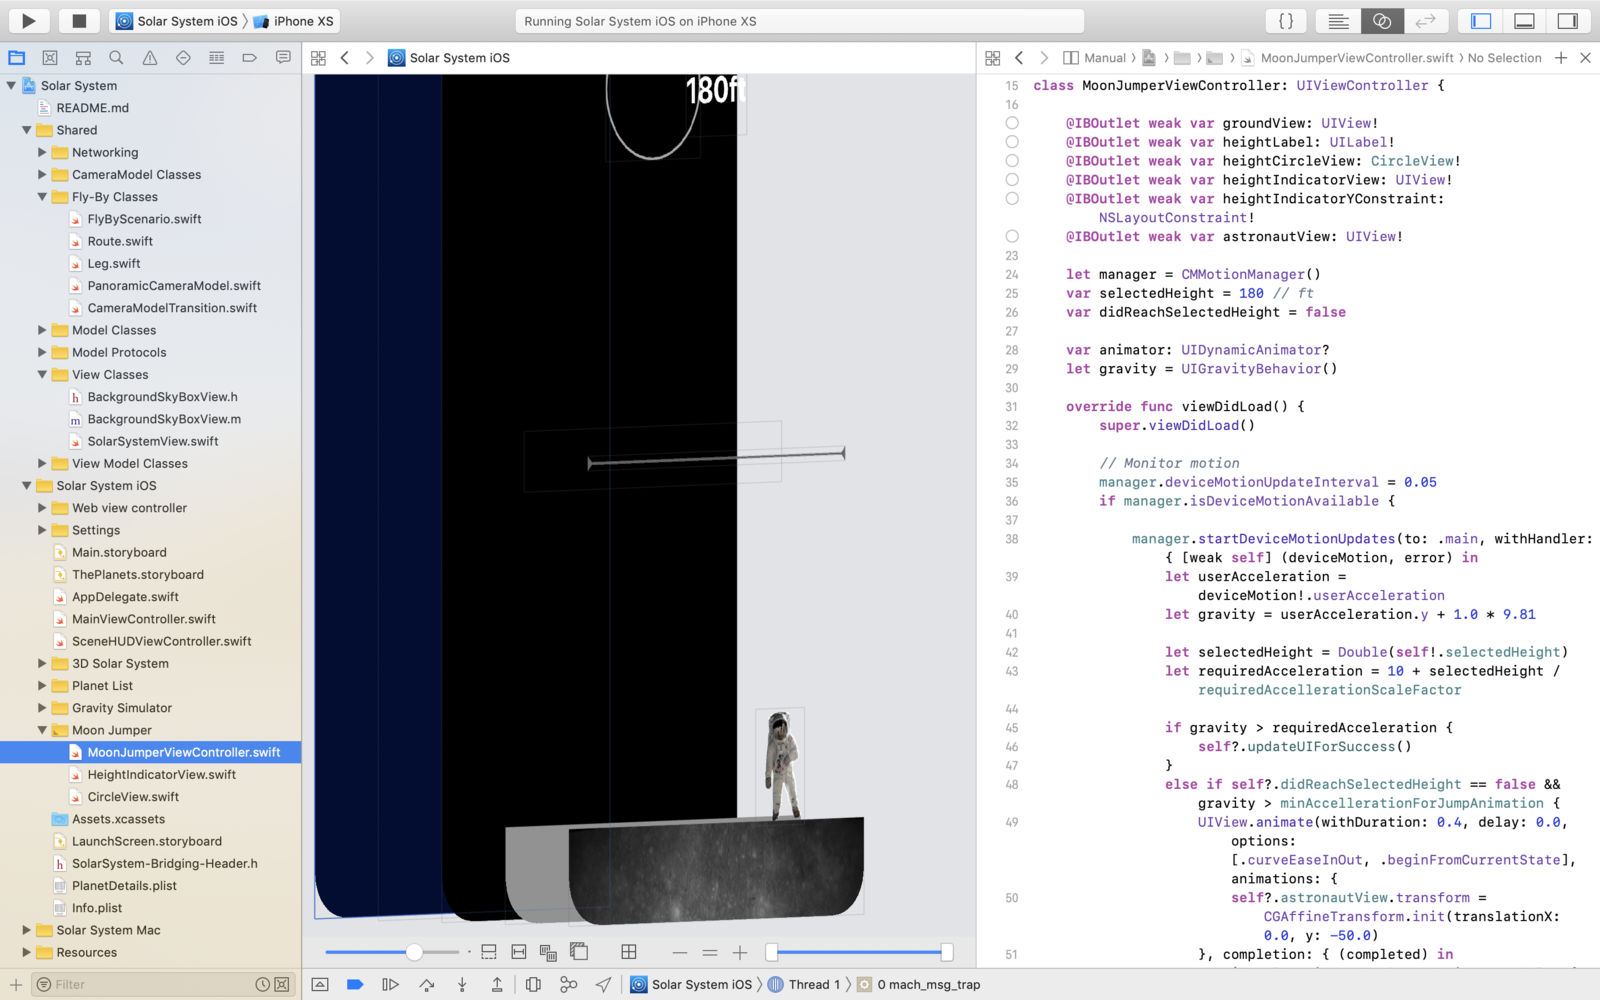 xcode for mac 10.12.6